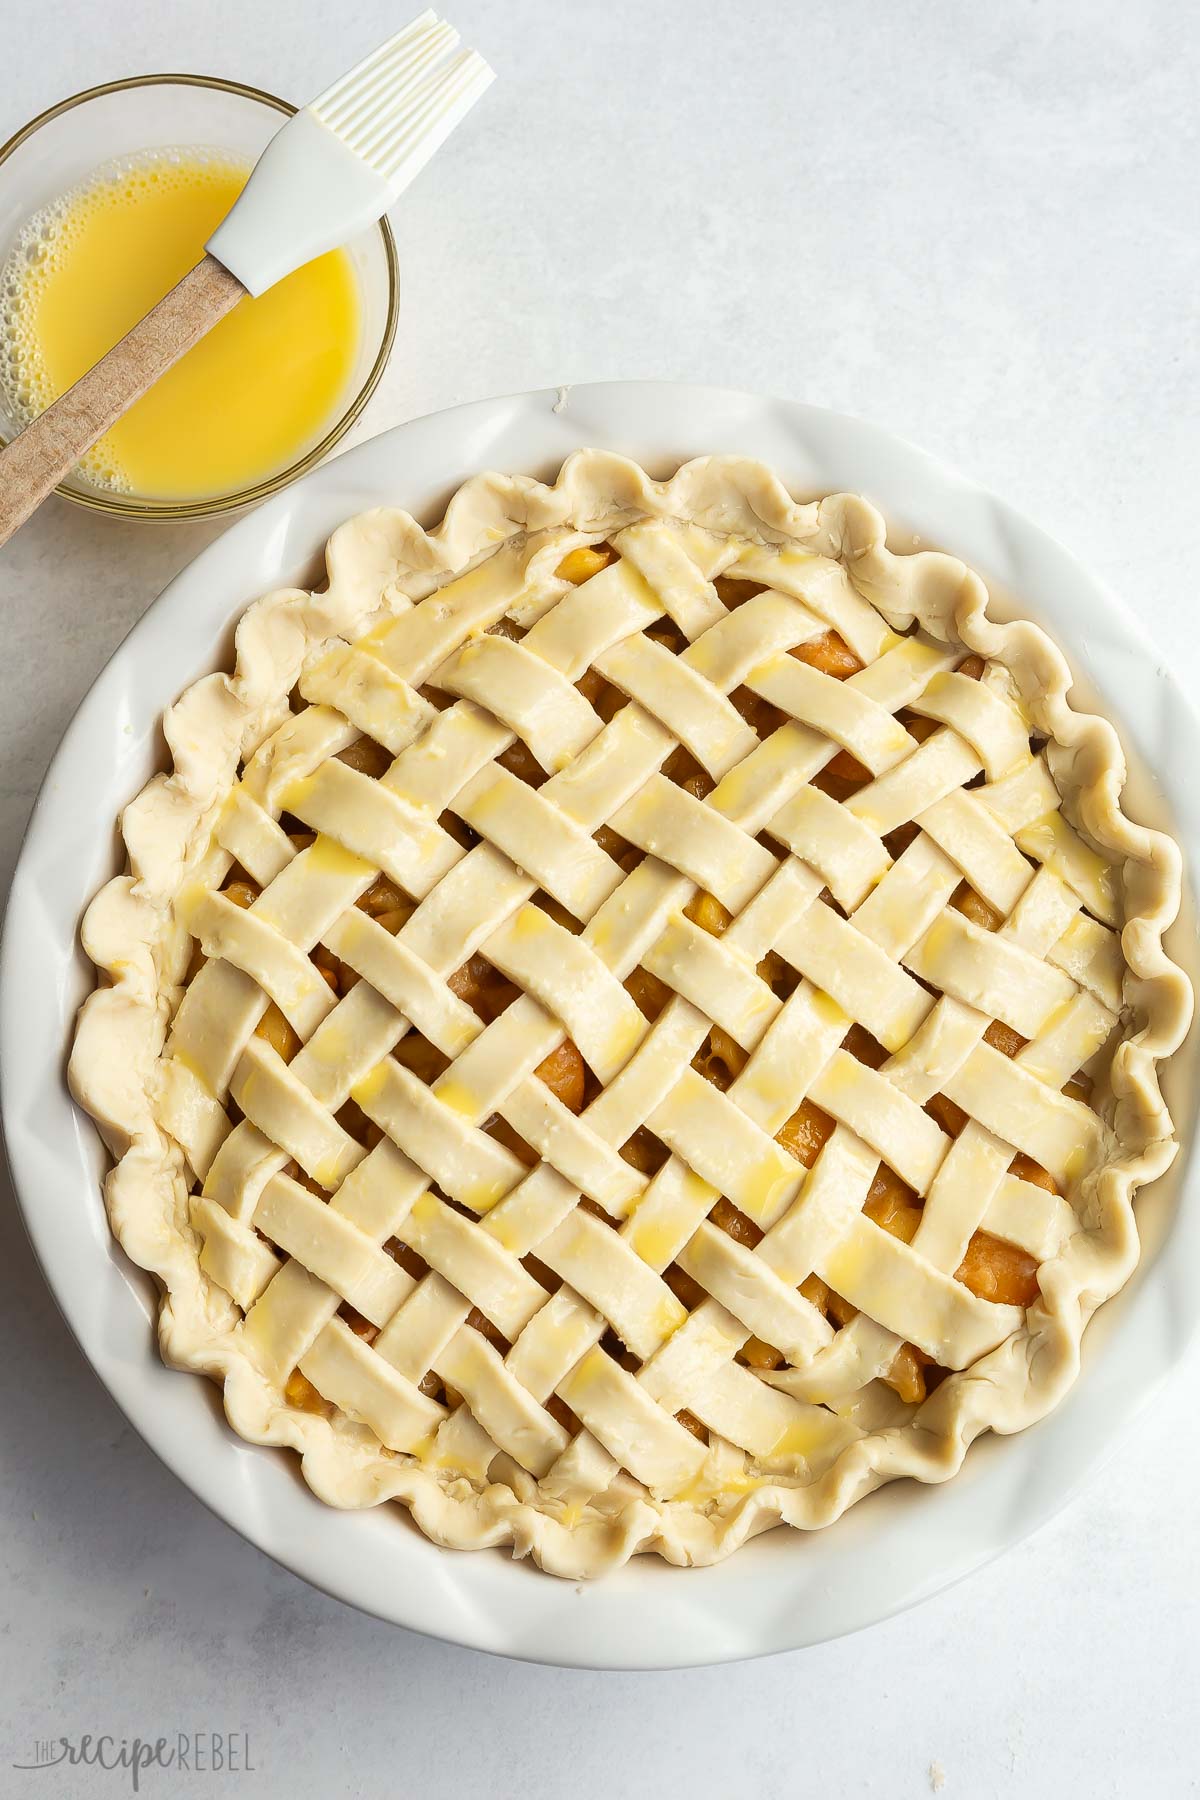 unbaked lattice crust with egg wash over top.